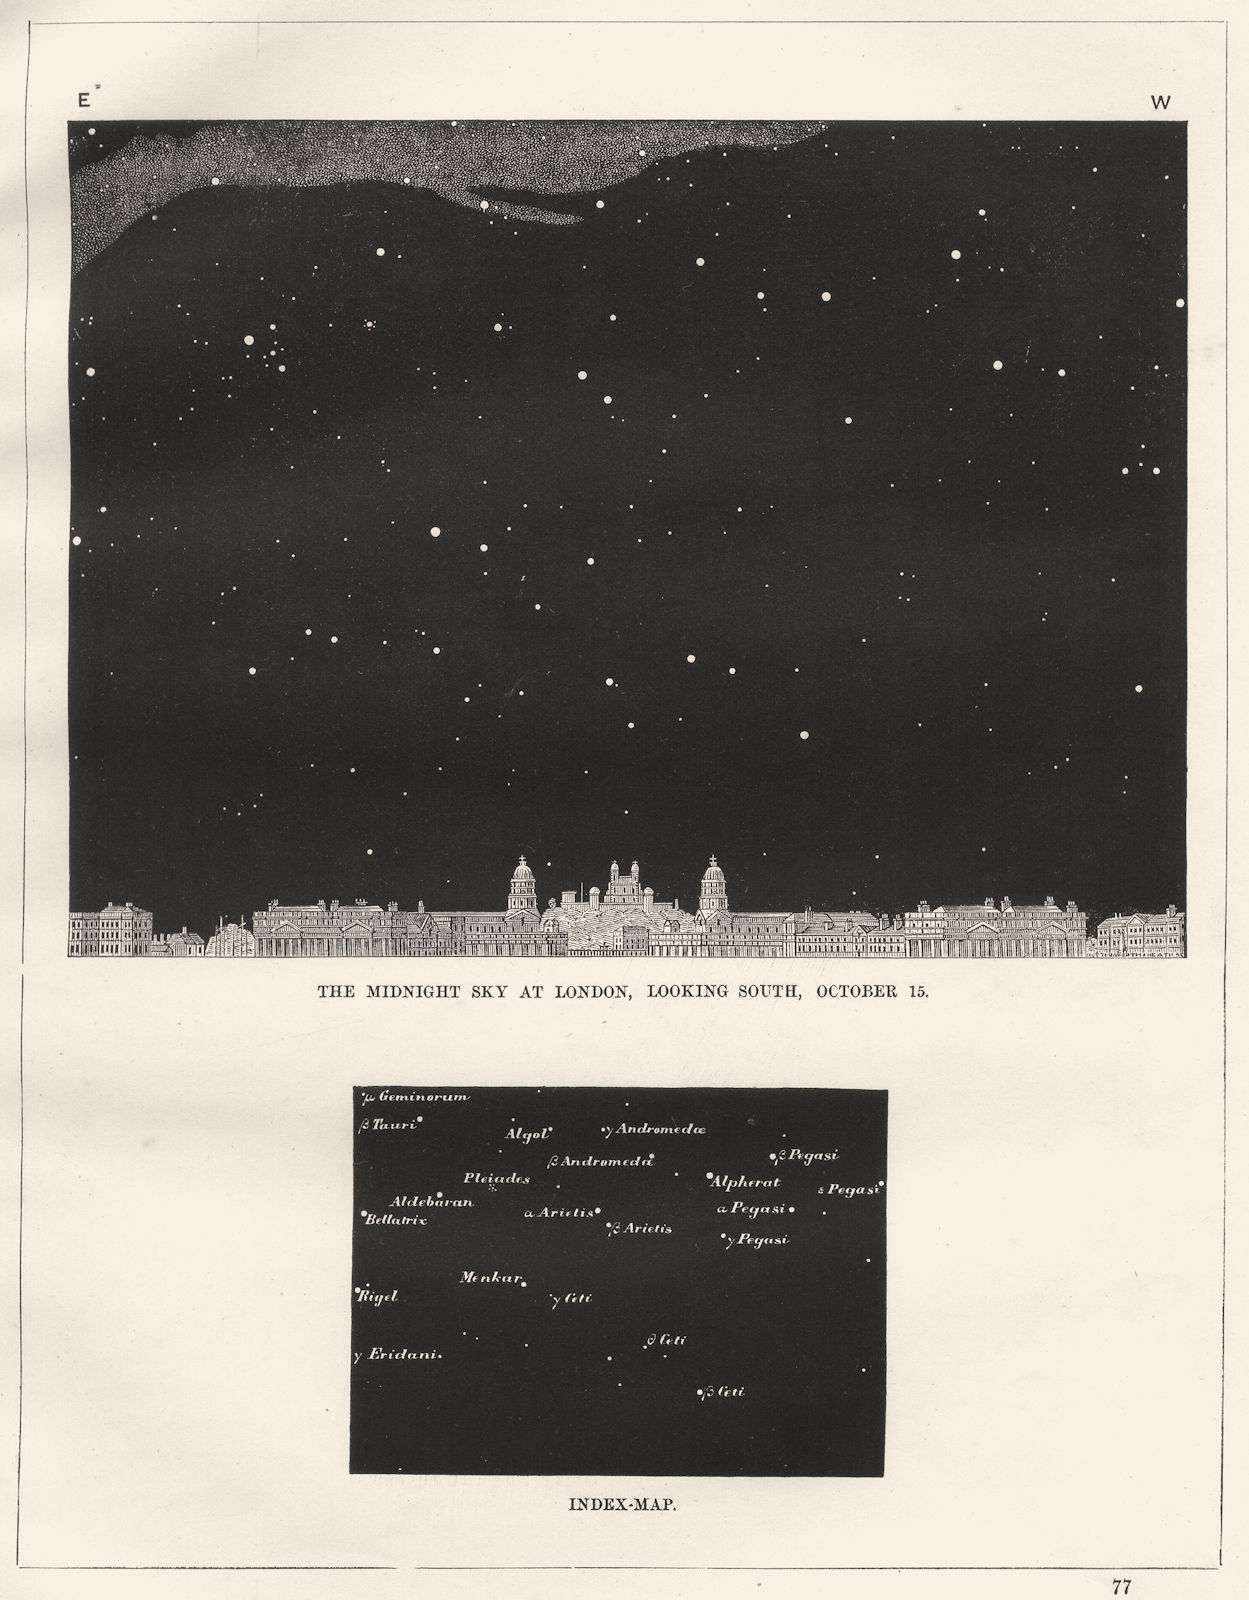 The Midnight Sky at London. Looking South, October 15. Greenwich 1869 print